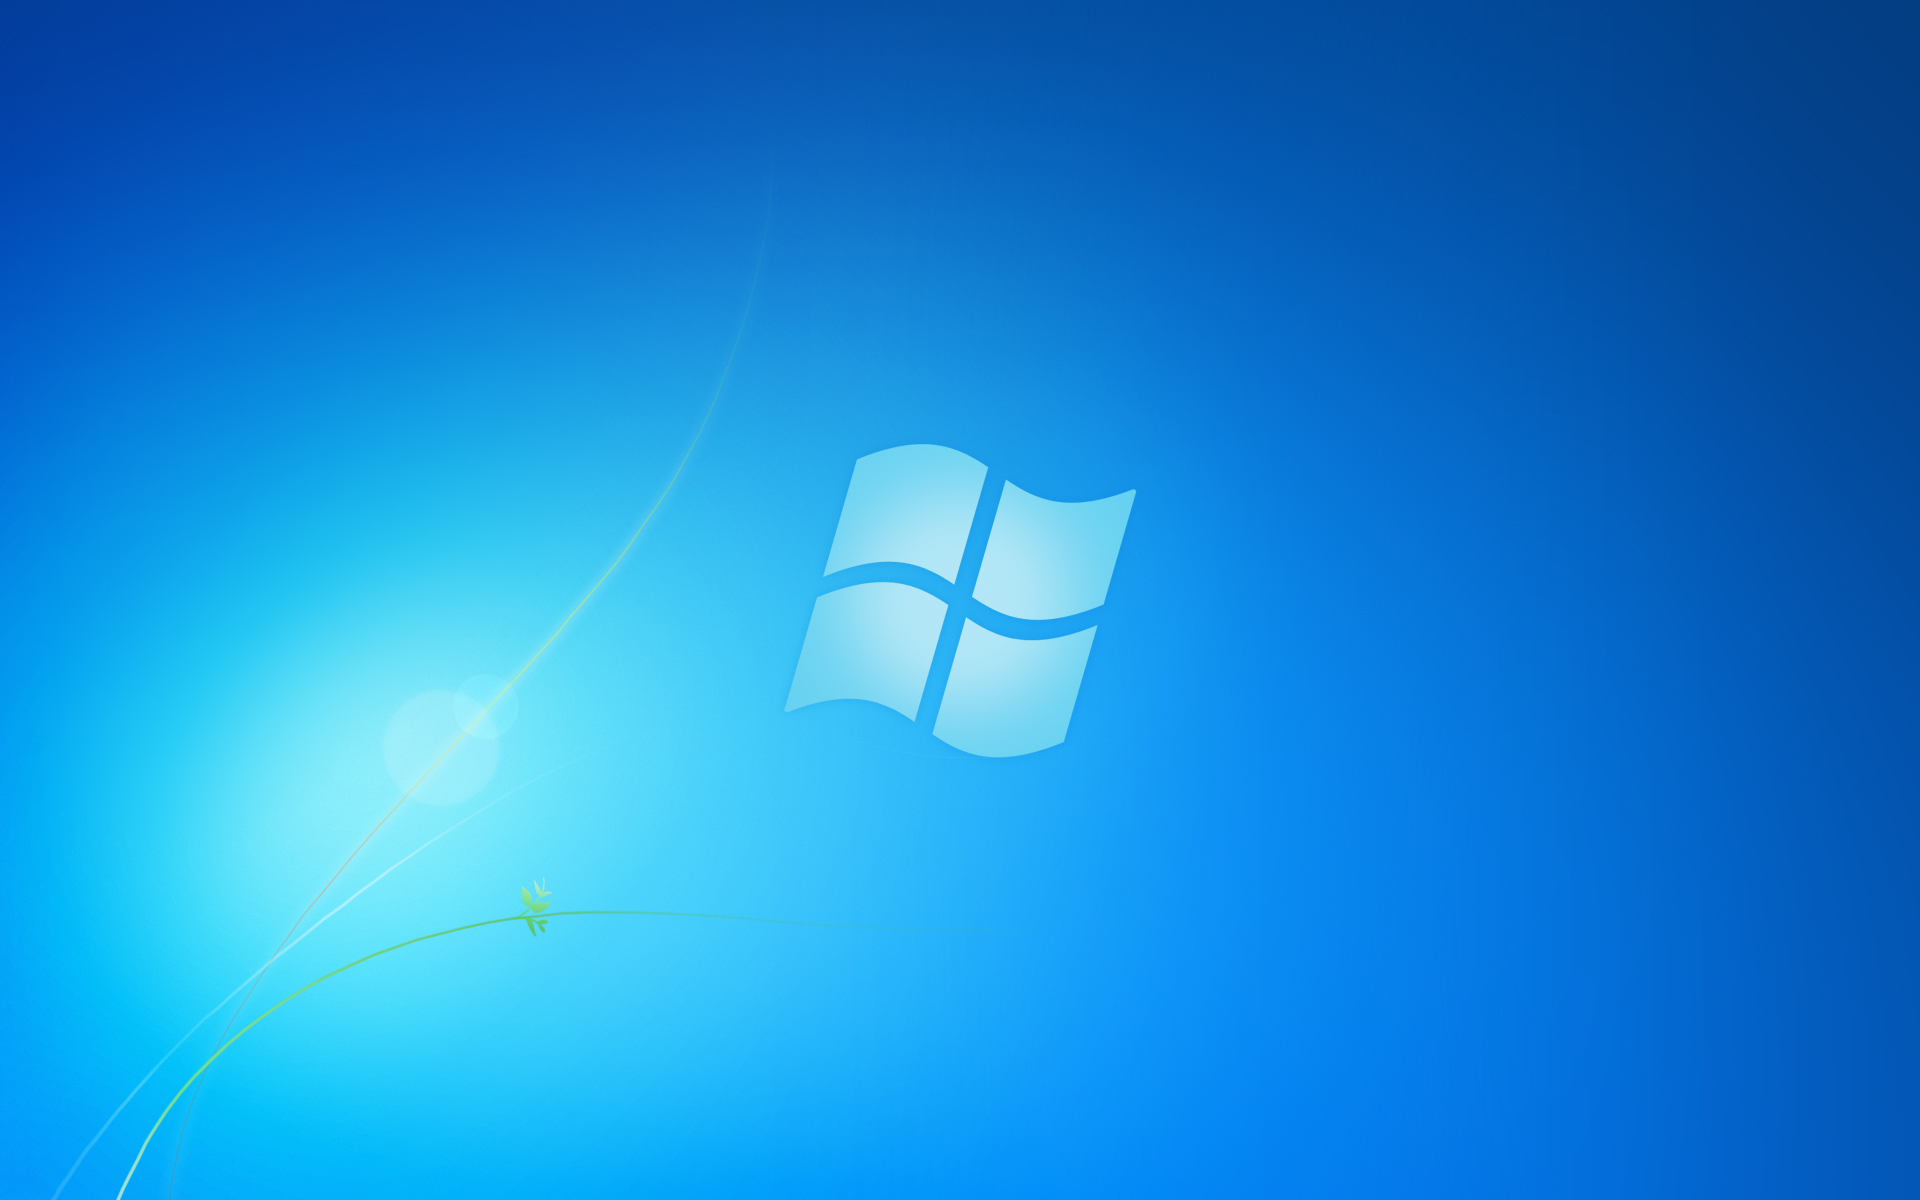 Change Windows 7 Starter Edition Wallpaper Easily With